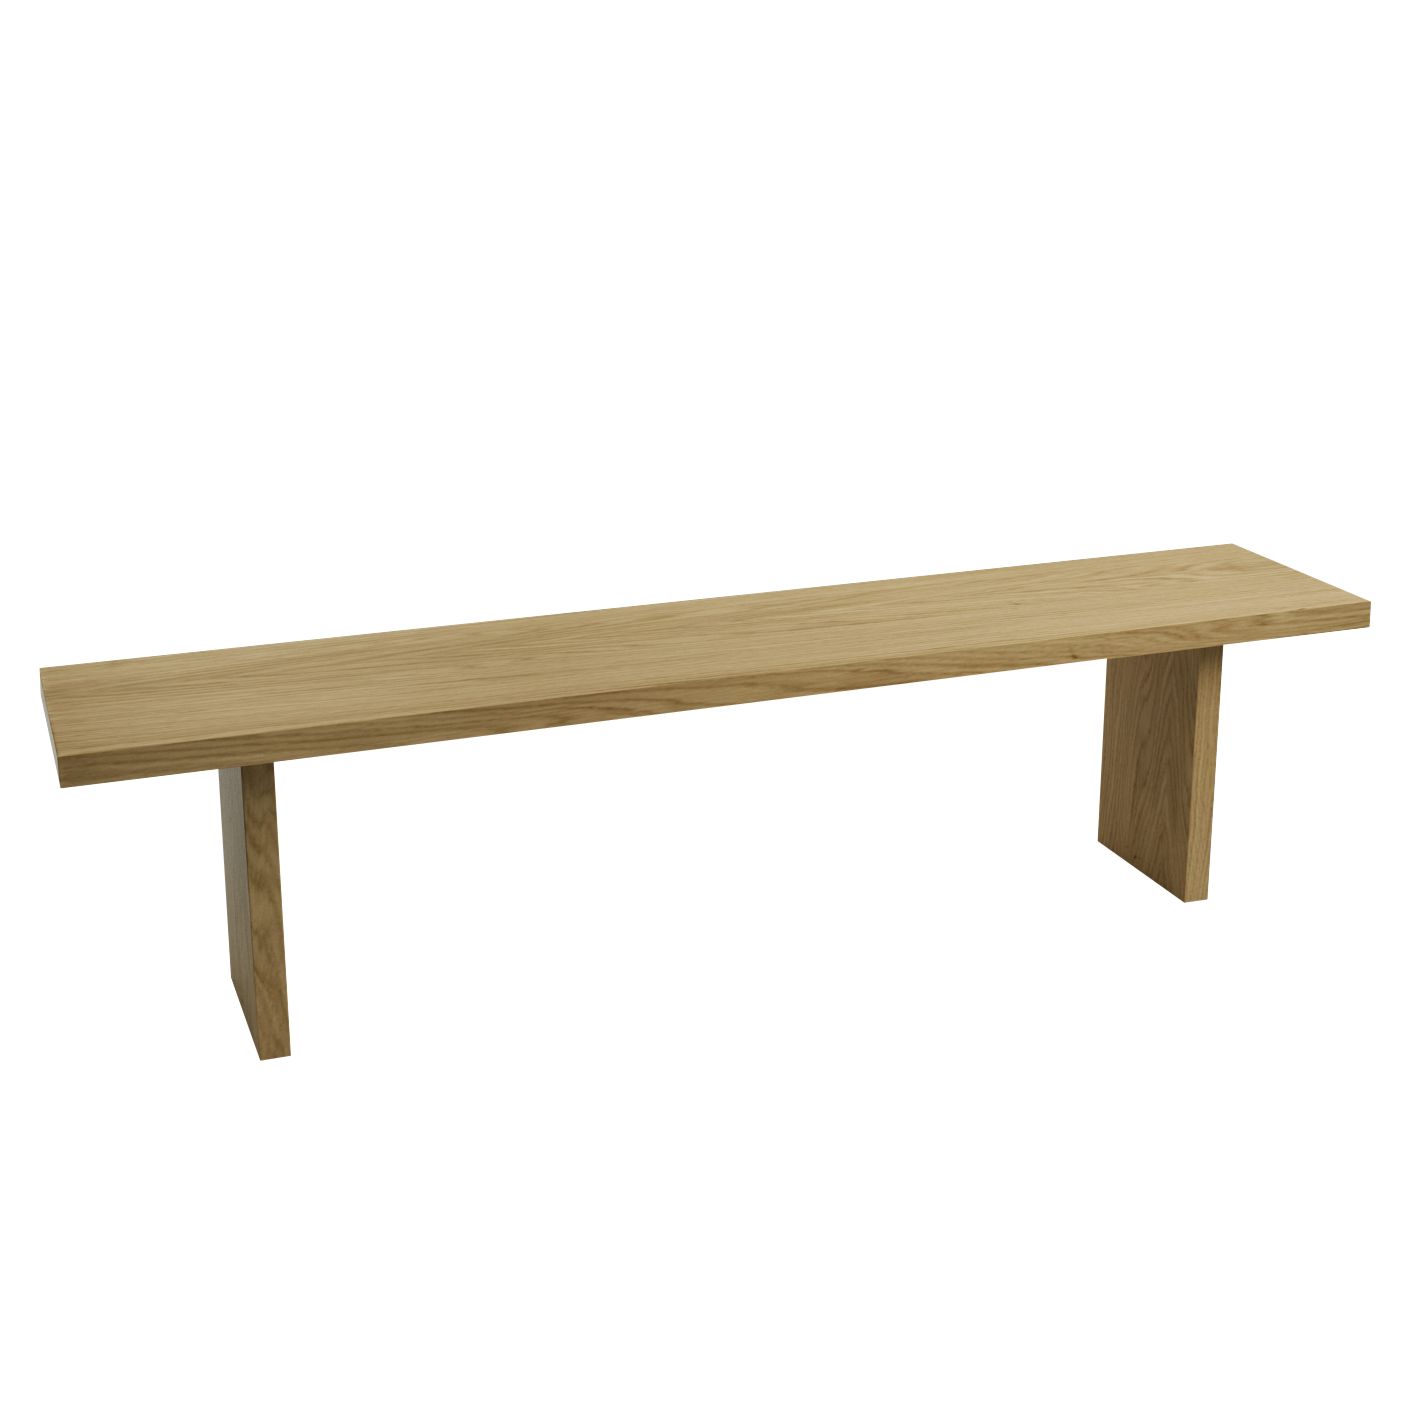 John Lewis & Partners Henry Dining Bench